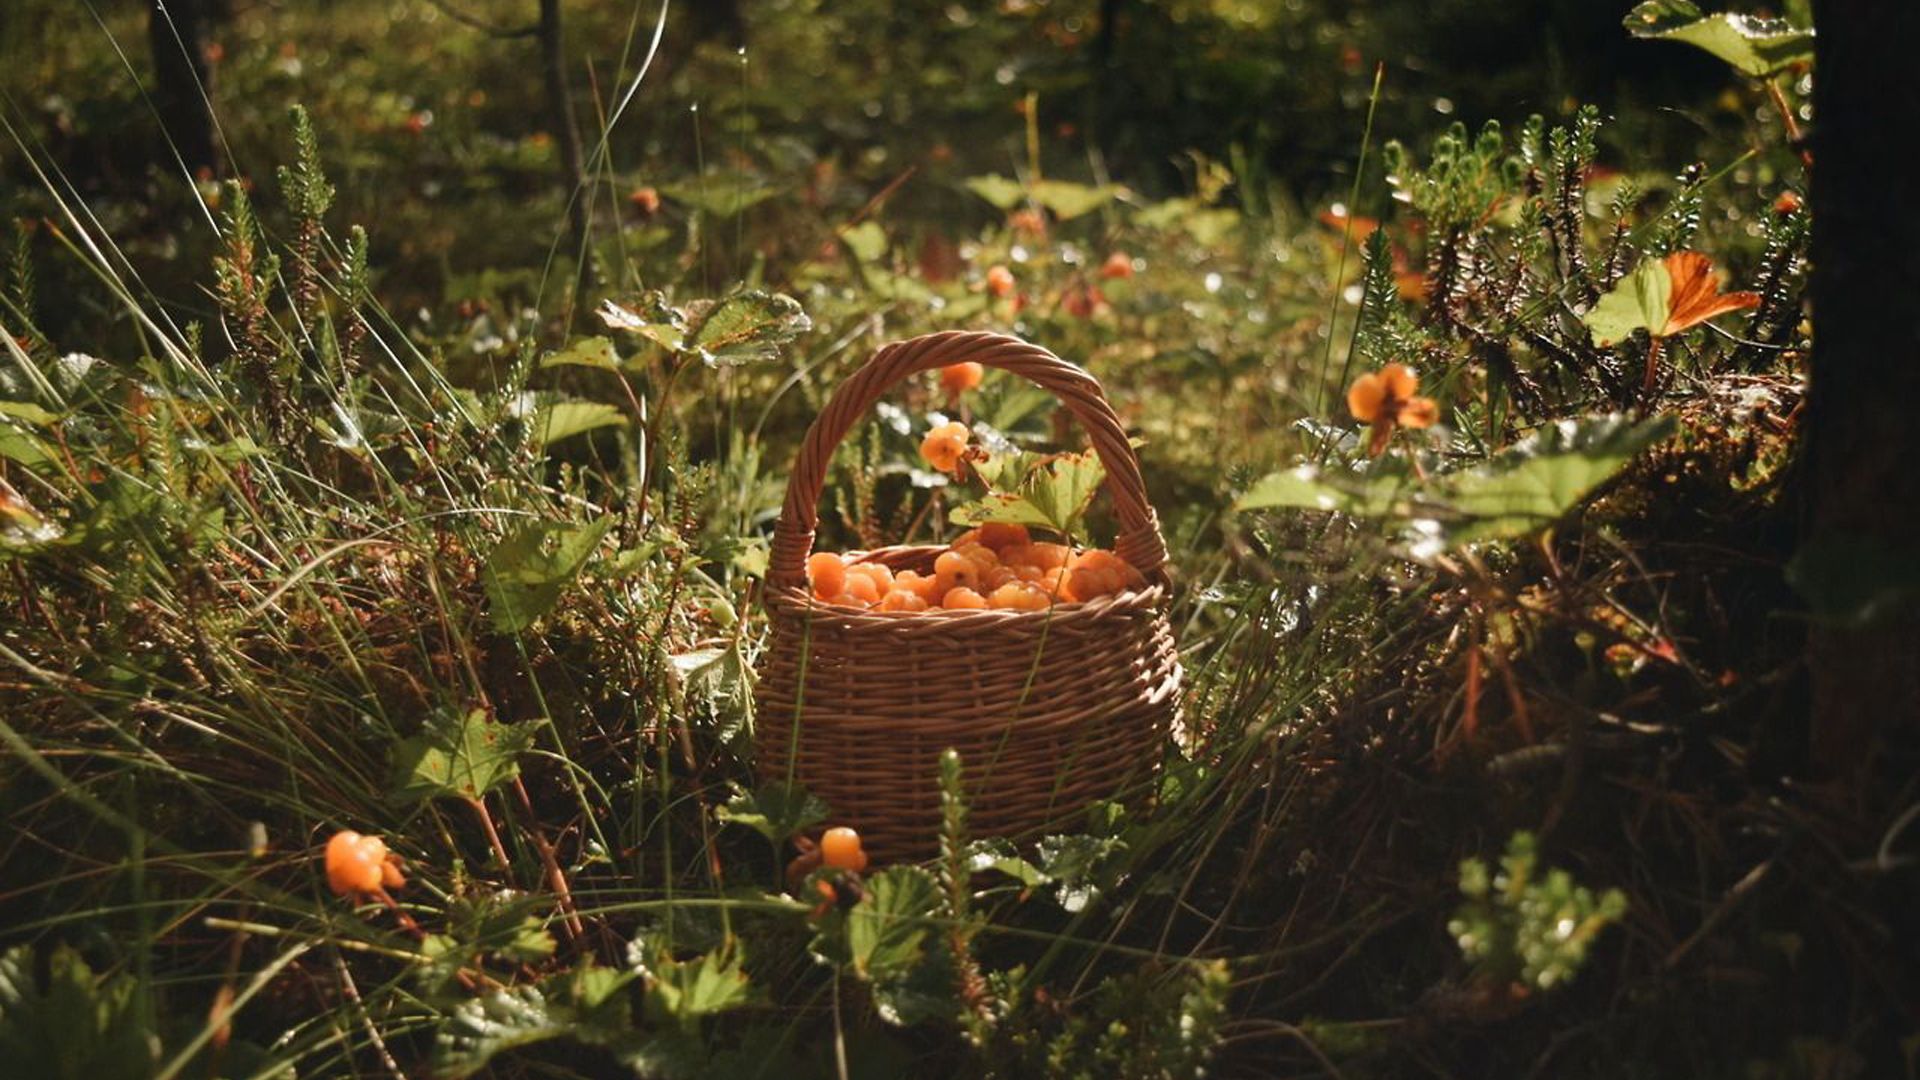 A basket of oranges sitting in the grass - Cottagecore